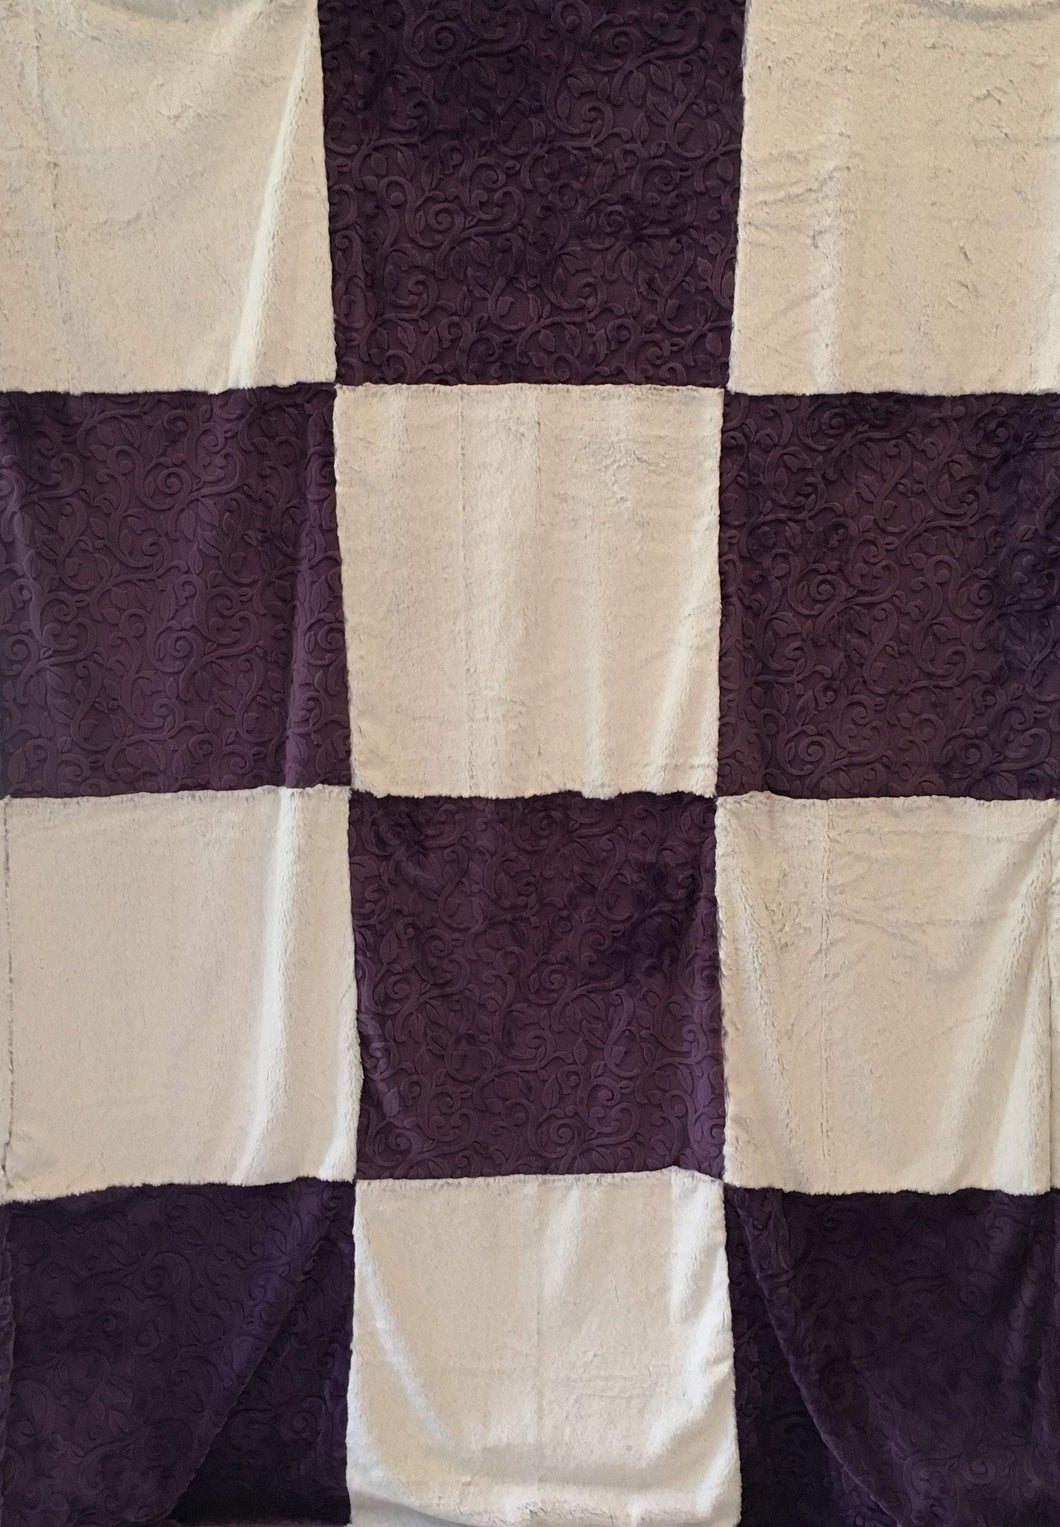 Patchwork Style Blanket: Throw in Frost Iris, Embossed Vine in Violet on Embossed Vine in Violet